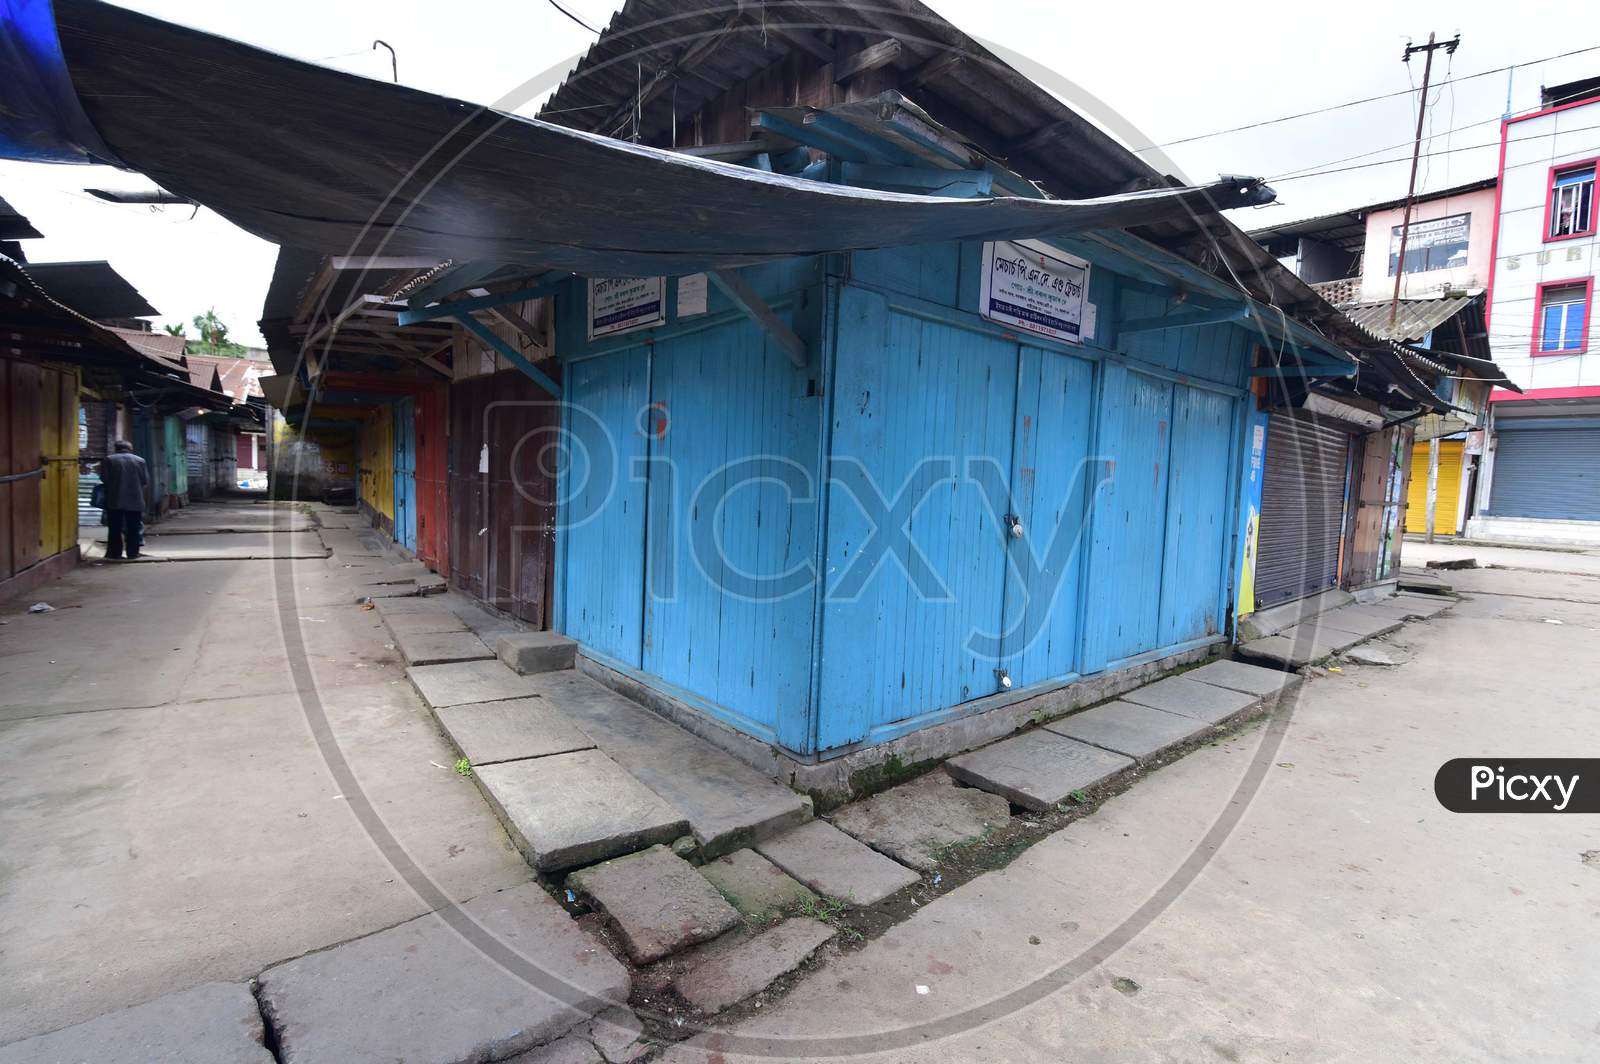 Markets are left empty as the government imposes lockdown to curb the spread of Coronavirus in Nagaon, Assam on July 05, 2020.